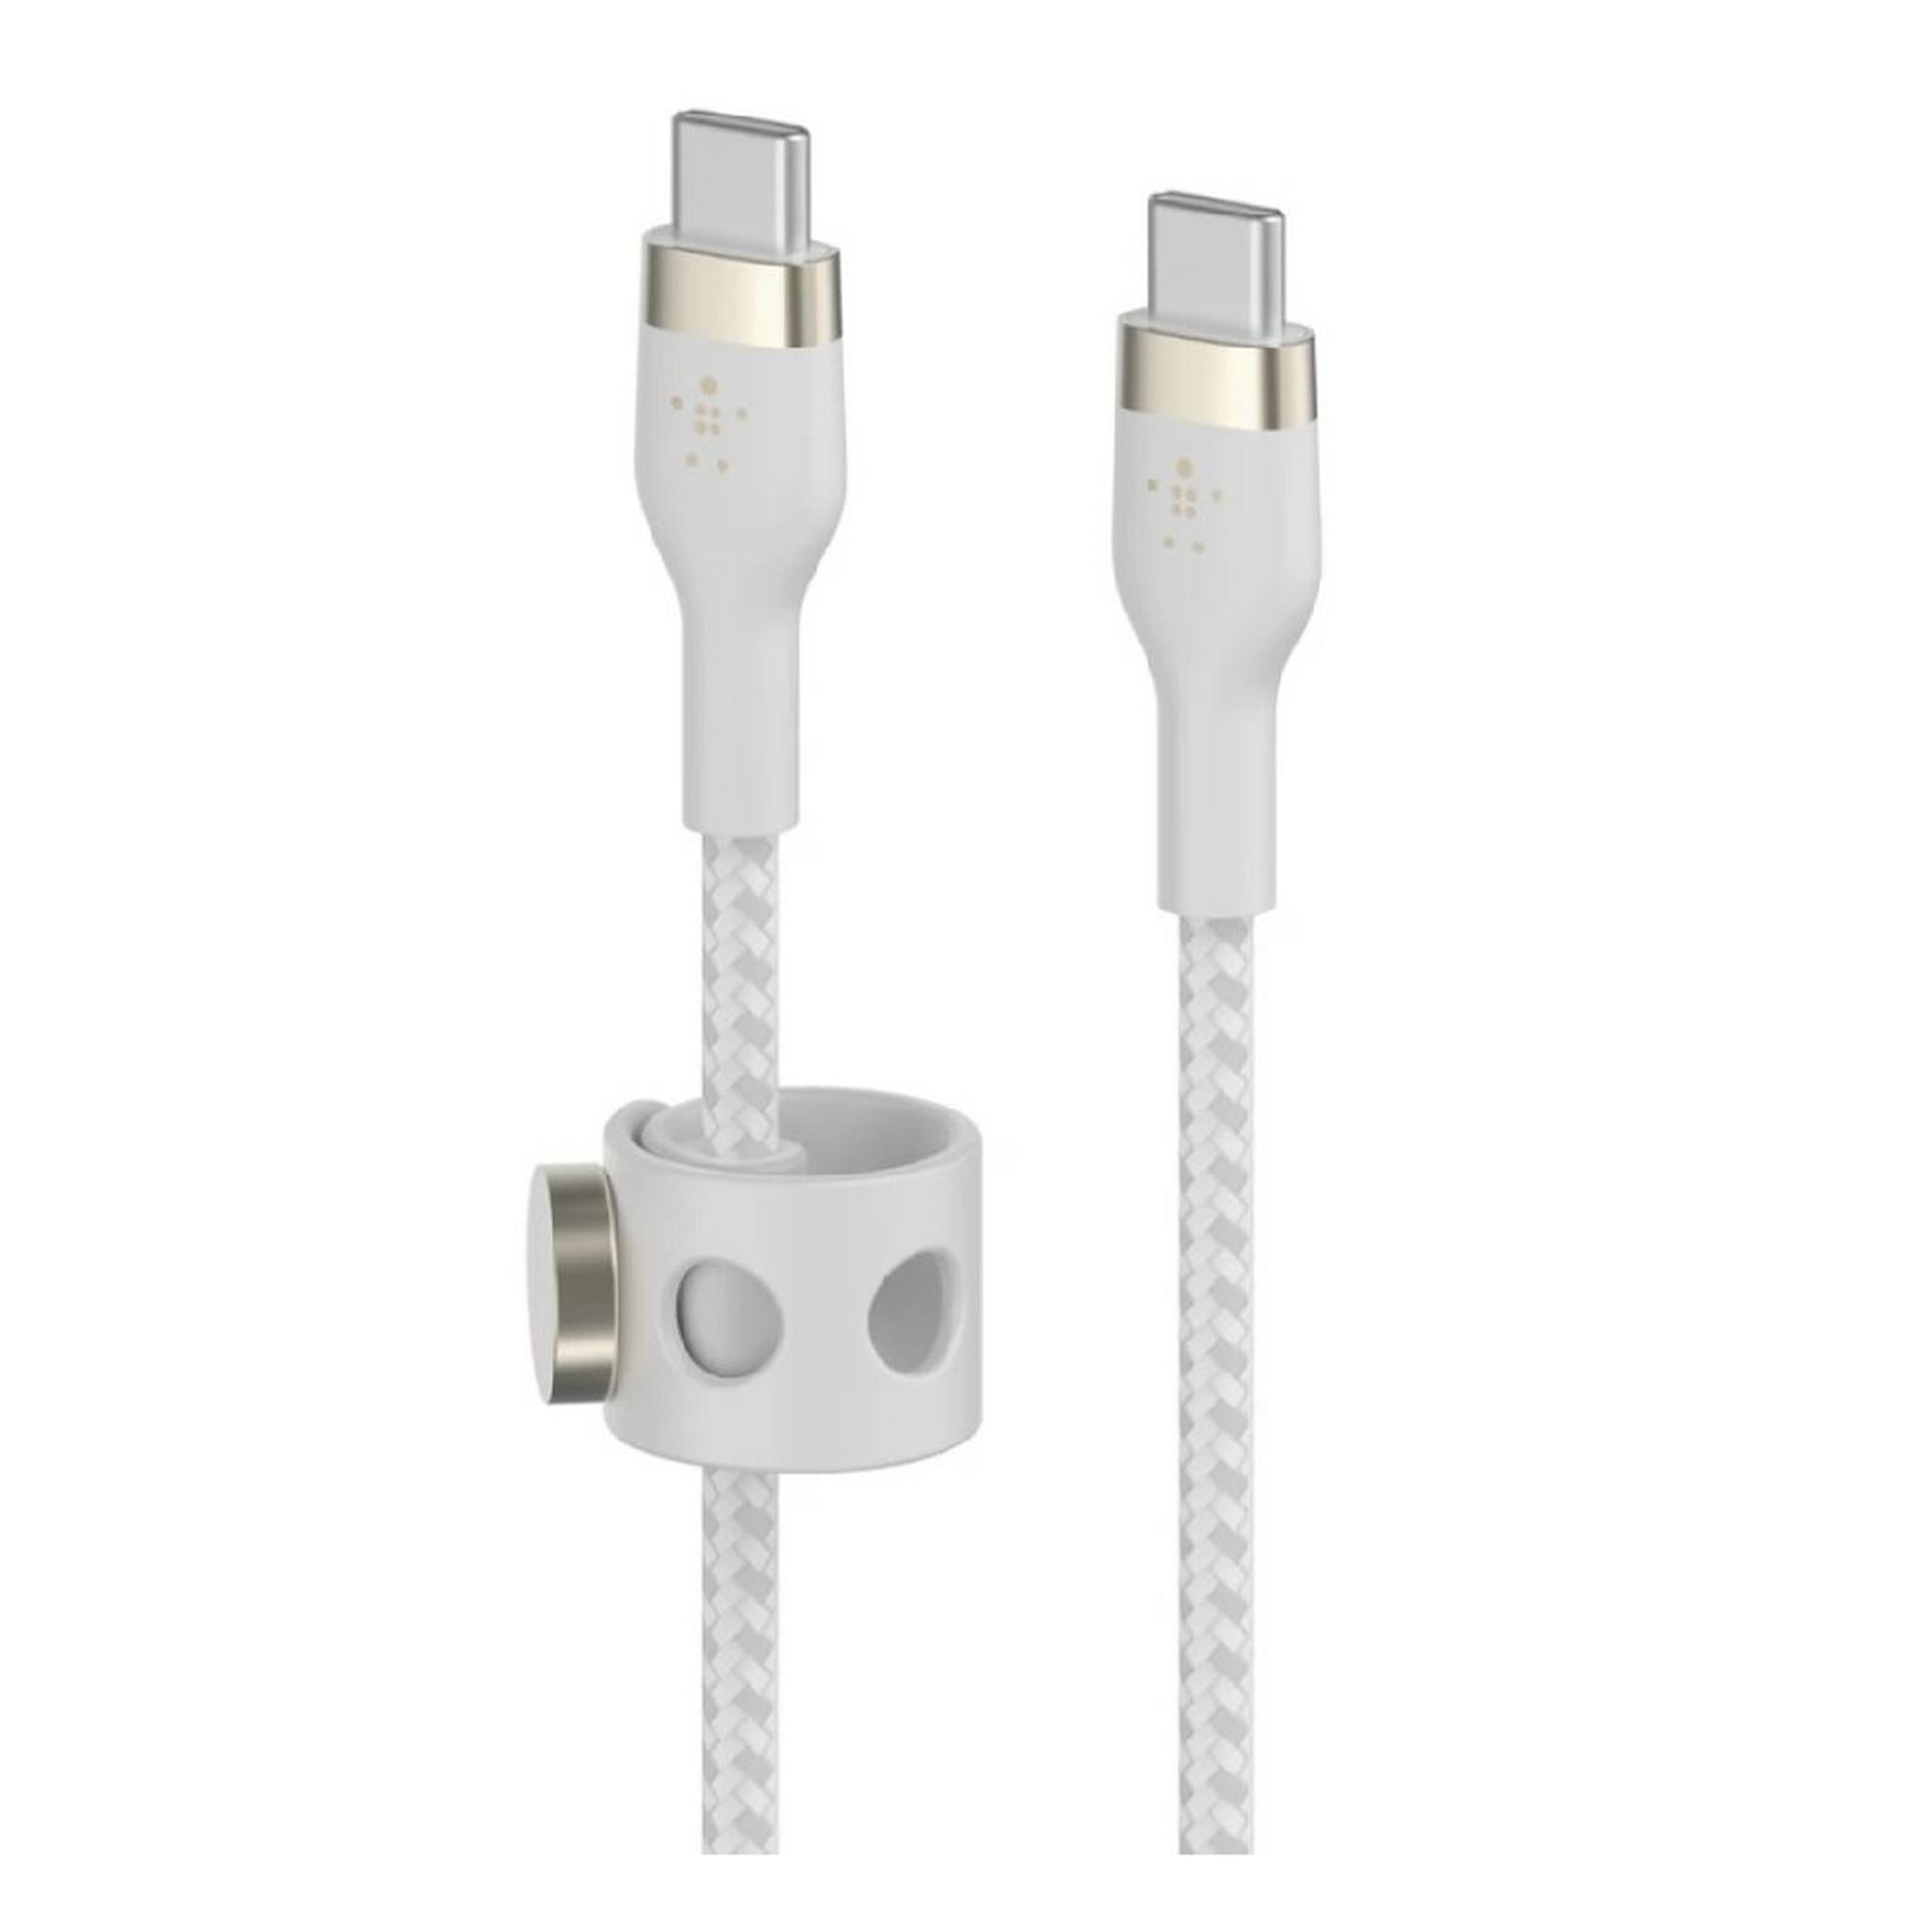 Belkin BoostCharge Pro Flex Braided USB C Charger Cable, CAB011bt3MWH – White